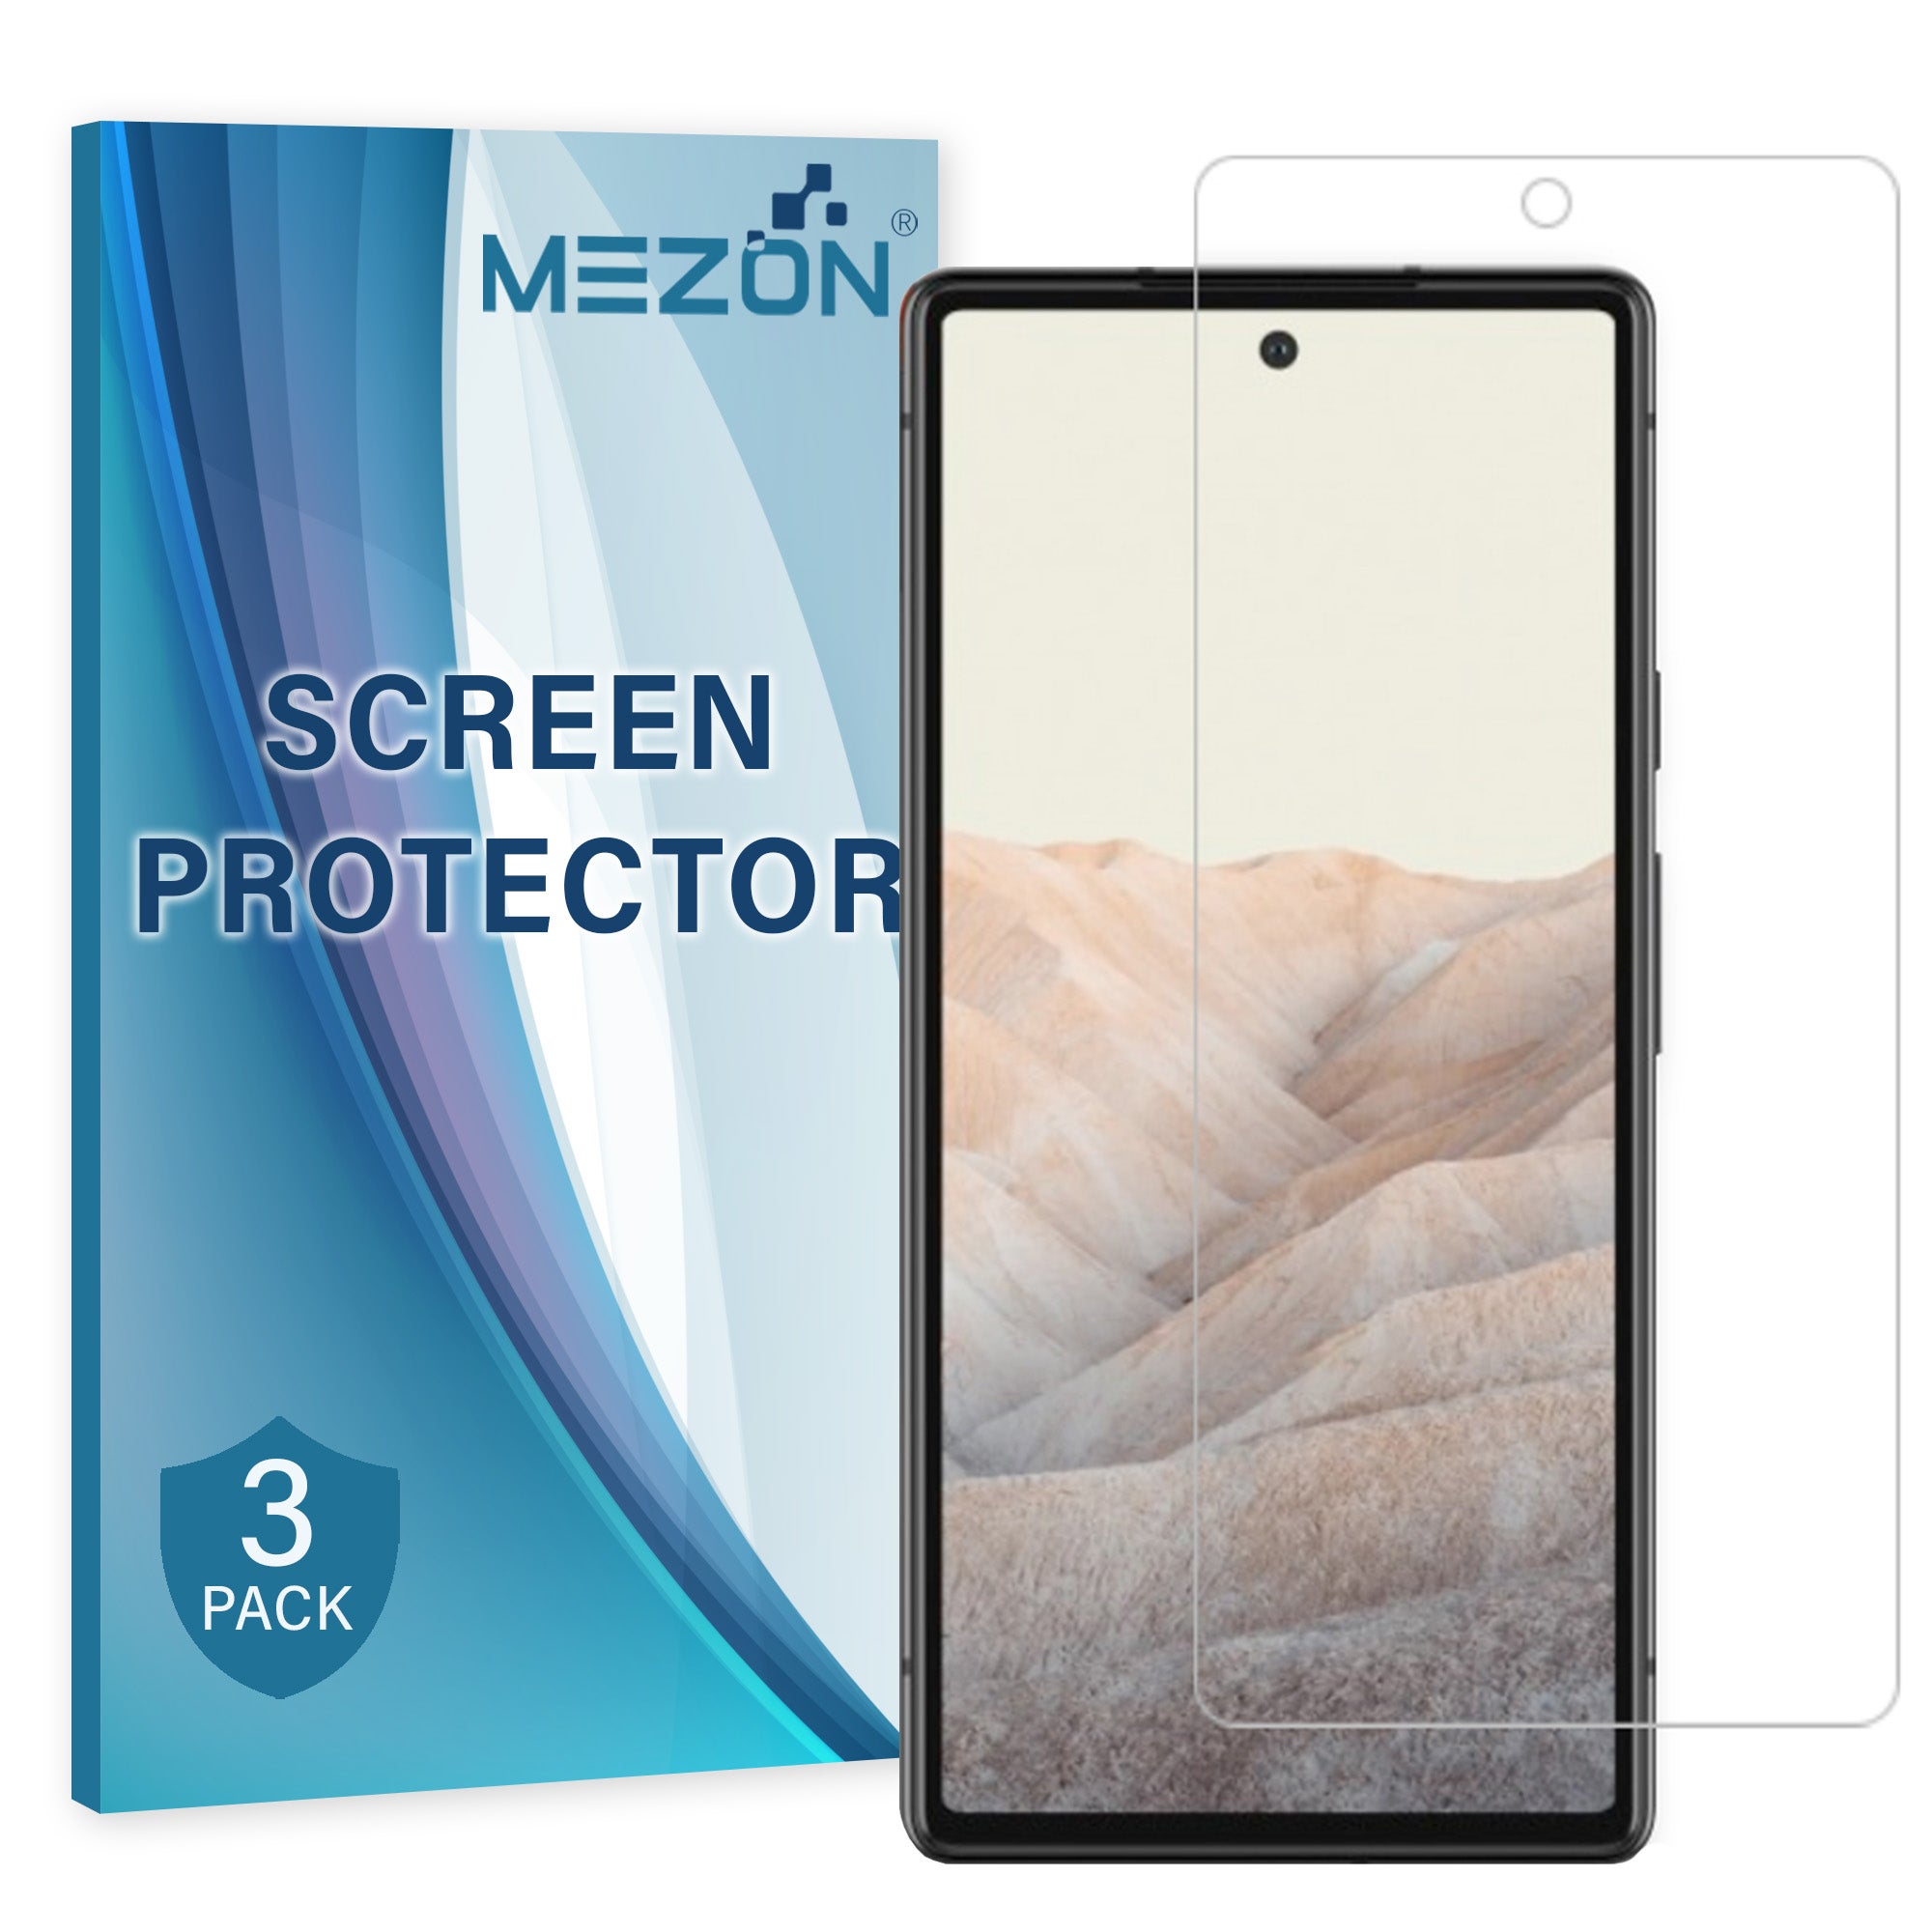 [3 Pack] Google Pixel 6 (6.4”) Ultra Clear Screen Protector Film by MEZON – Case Friendly, Shock Absorption (Pixel 6, Clear) – FREE EXPRESS